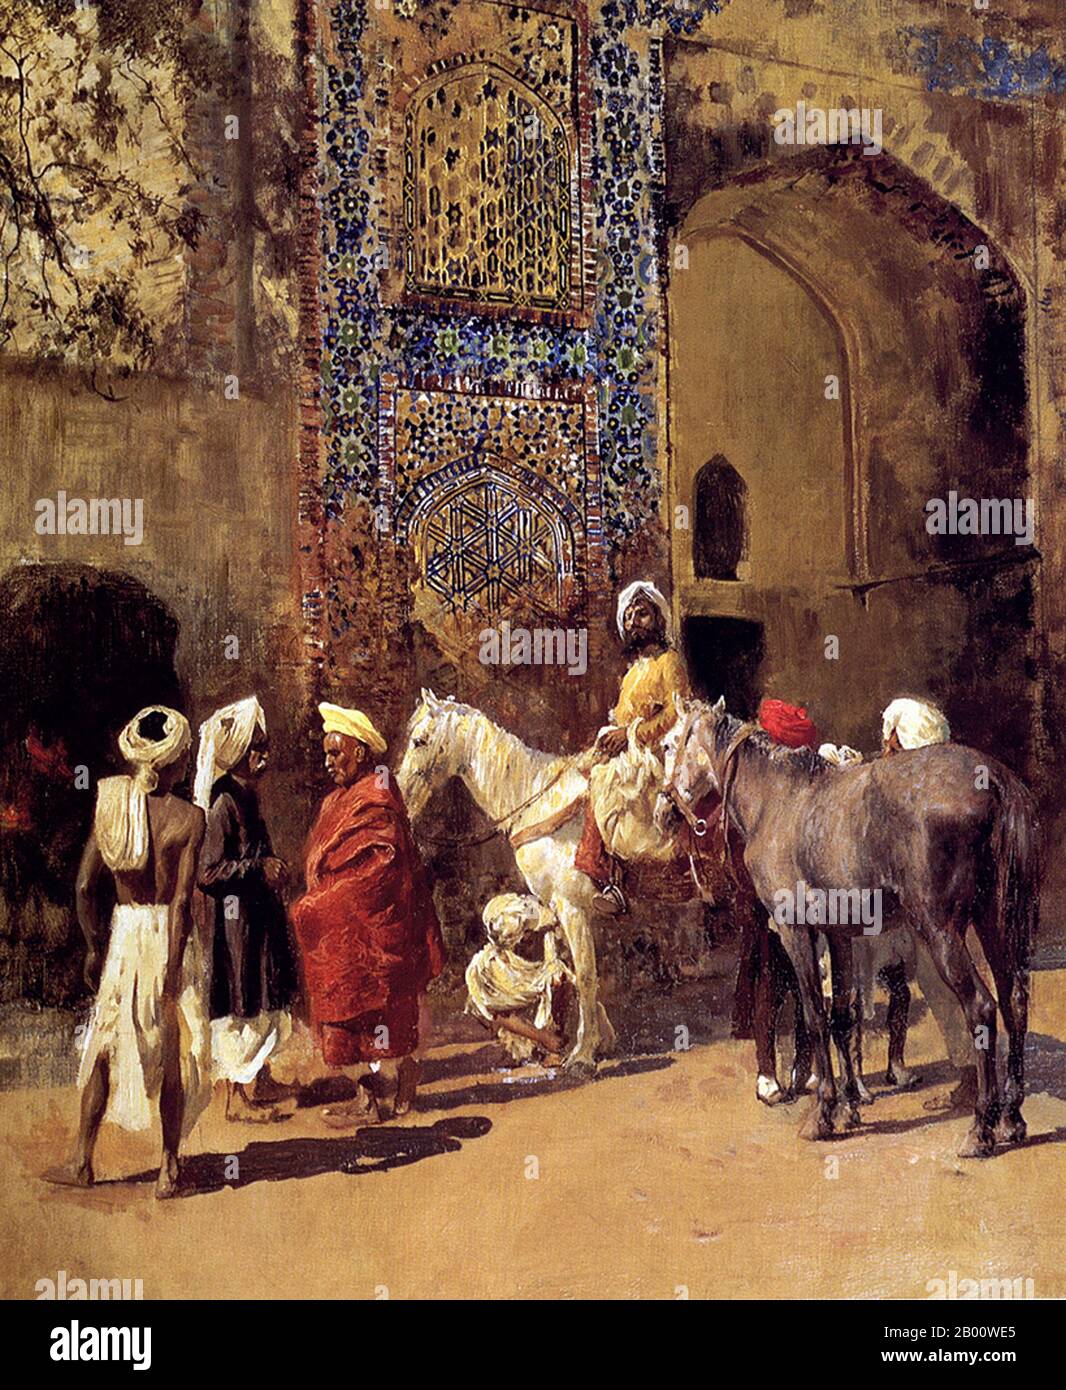 India: 'Blue Tiled Mosque at Delhi'. Oil on canvas painting by Edwin Lord Weeks (1849-1903), c. 1885.  Edwin Lord Weeks (1849 – 1903), American artist and Orientalist, was born at Boston, Massachusetts, in 1849. He was a pupil of Léon Bonnat and of Jean-Léon Gérôme, at Paris. He made many voyages to the East, and was distinguished as a painter of oriental scenes.  Weeks' parents were affluent spice and tea merchants from Newton, a suburb of Boston and as such they were able to accept, probably encourage, and certainly finance their son's youthful interest in painting and travelling. Stock Photo